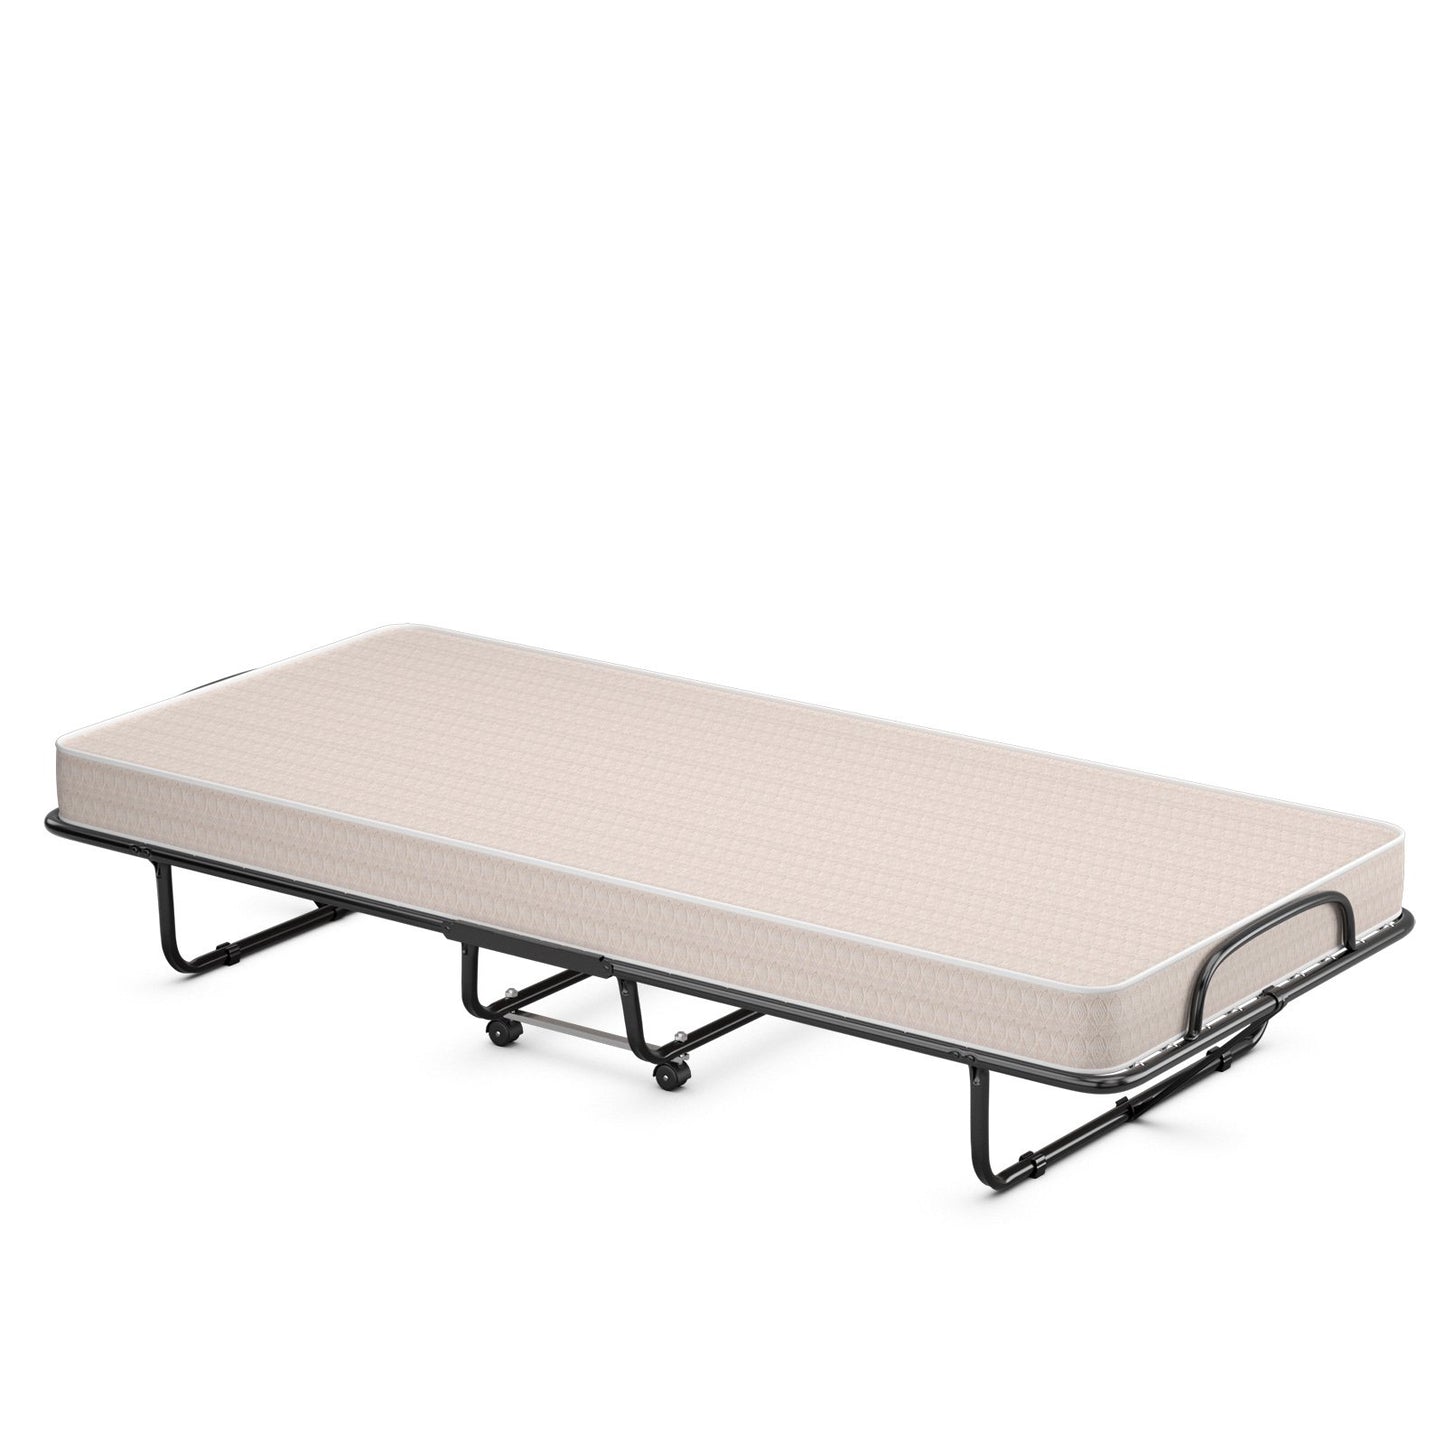 Rollaway Guest Bed with Sturdy Steel Frame and Memory Foam Mattress Made in Italy, Beige - Gallery Canada